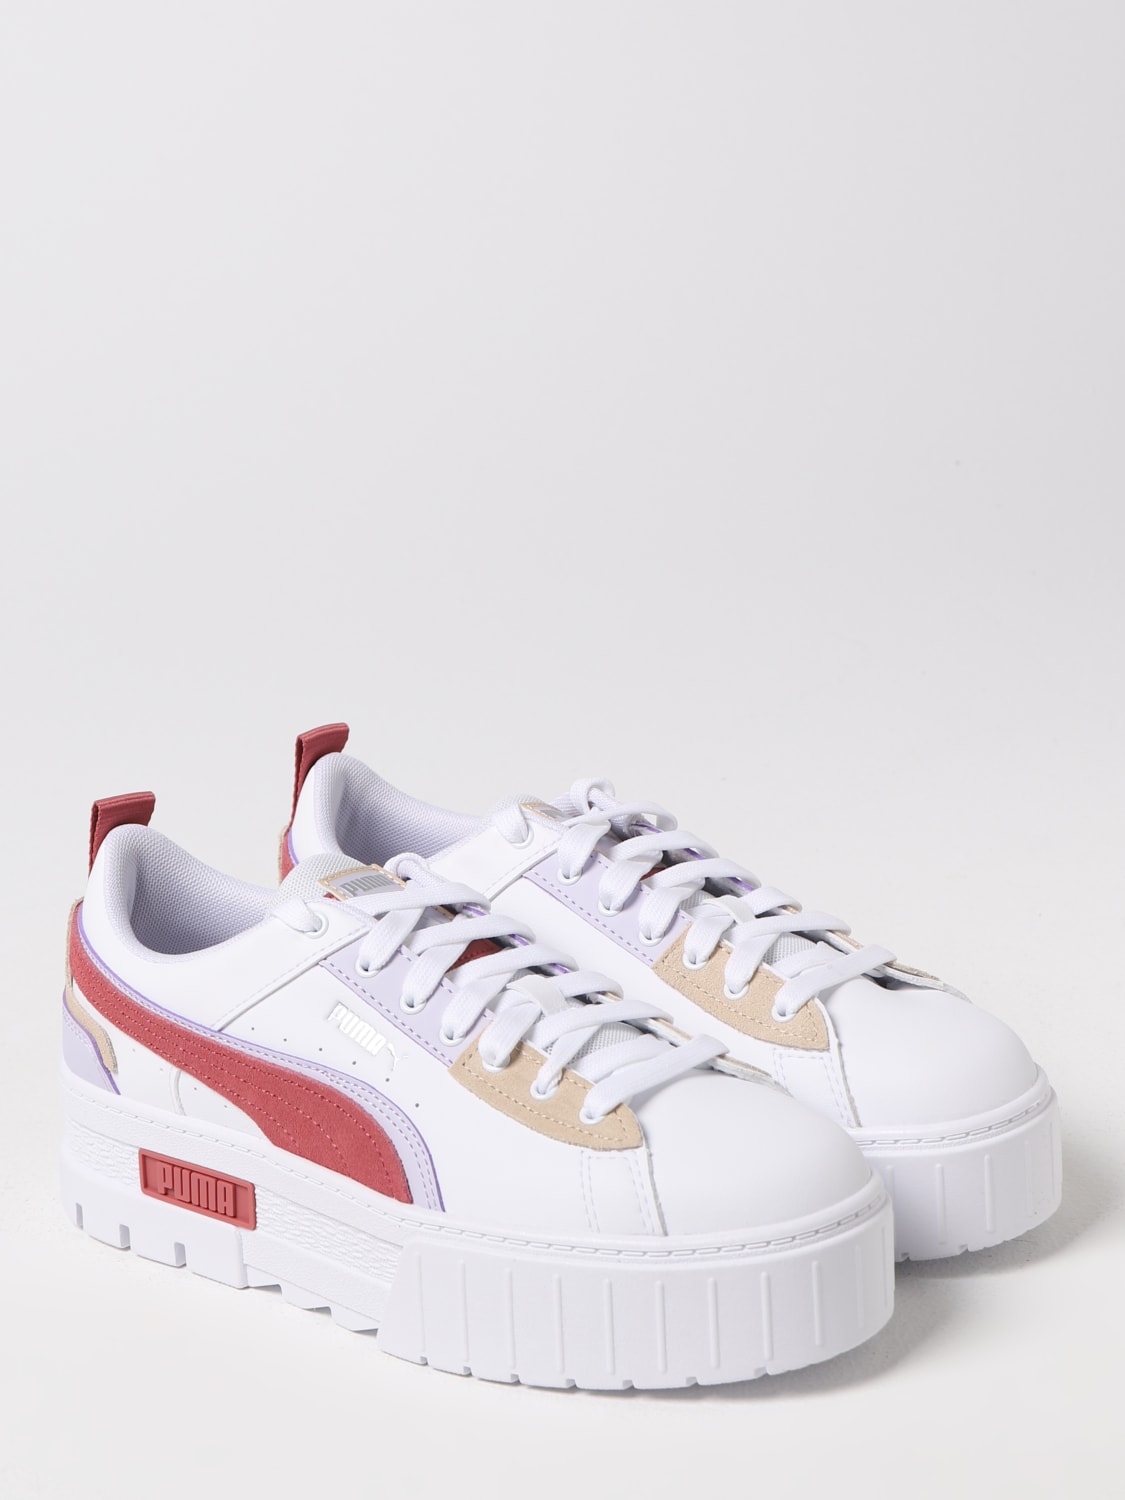 Puma sneakers woman - White 2 | Puma sneakers online at GIGLIO.COM